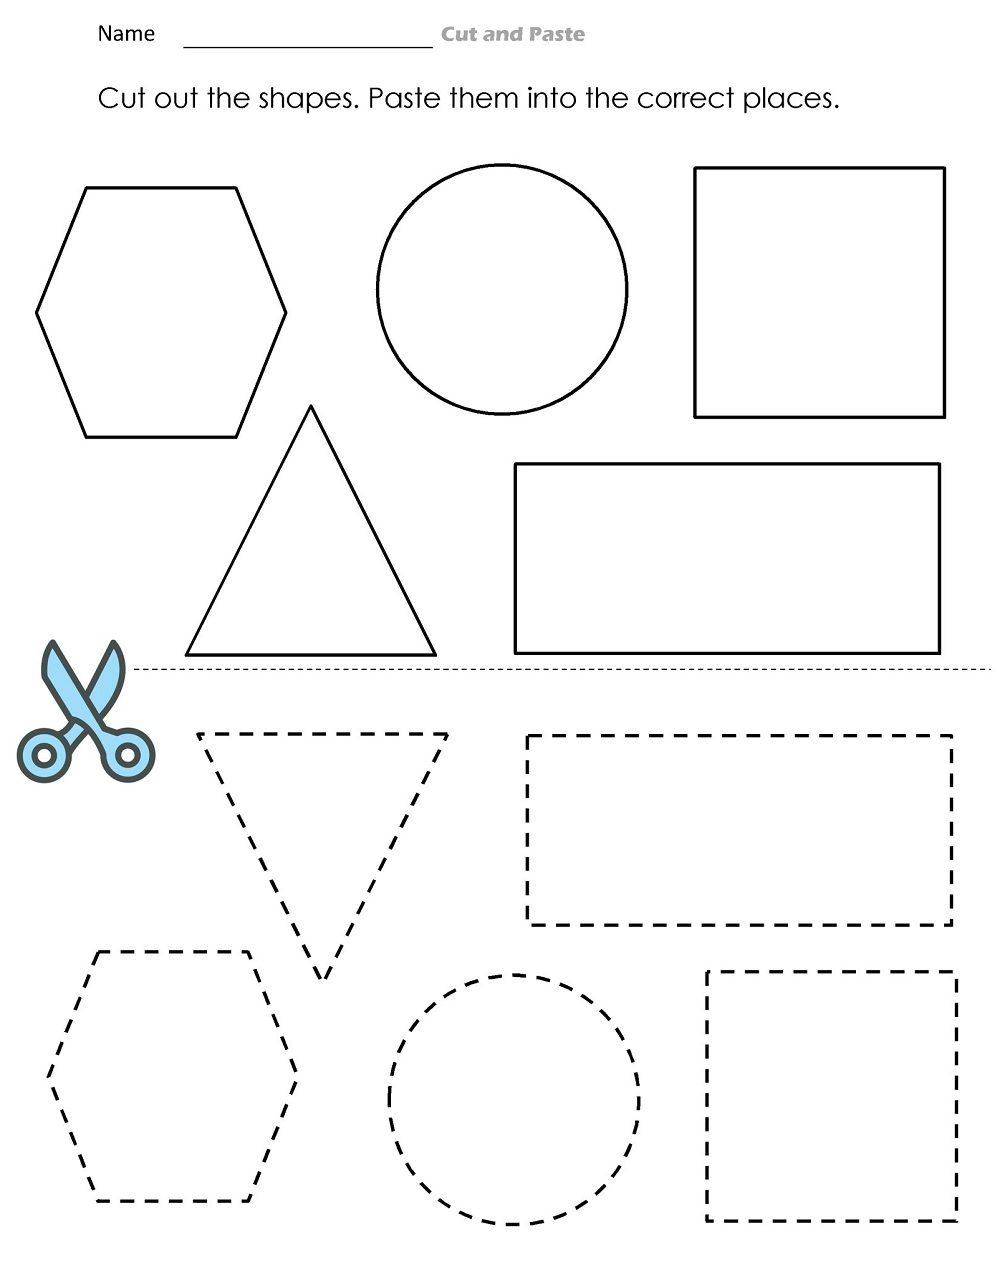 Shape Cut and Paste Worksheet